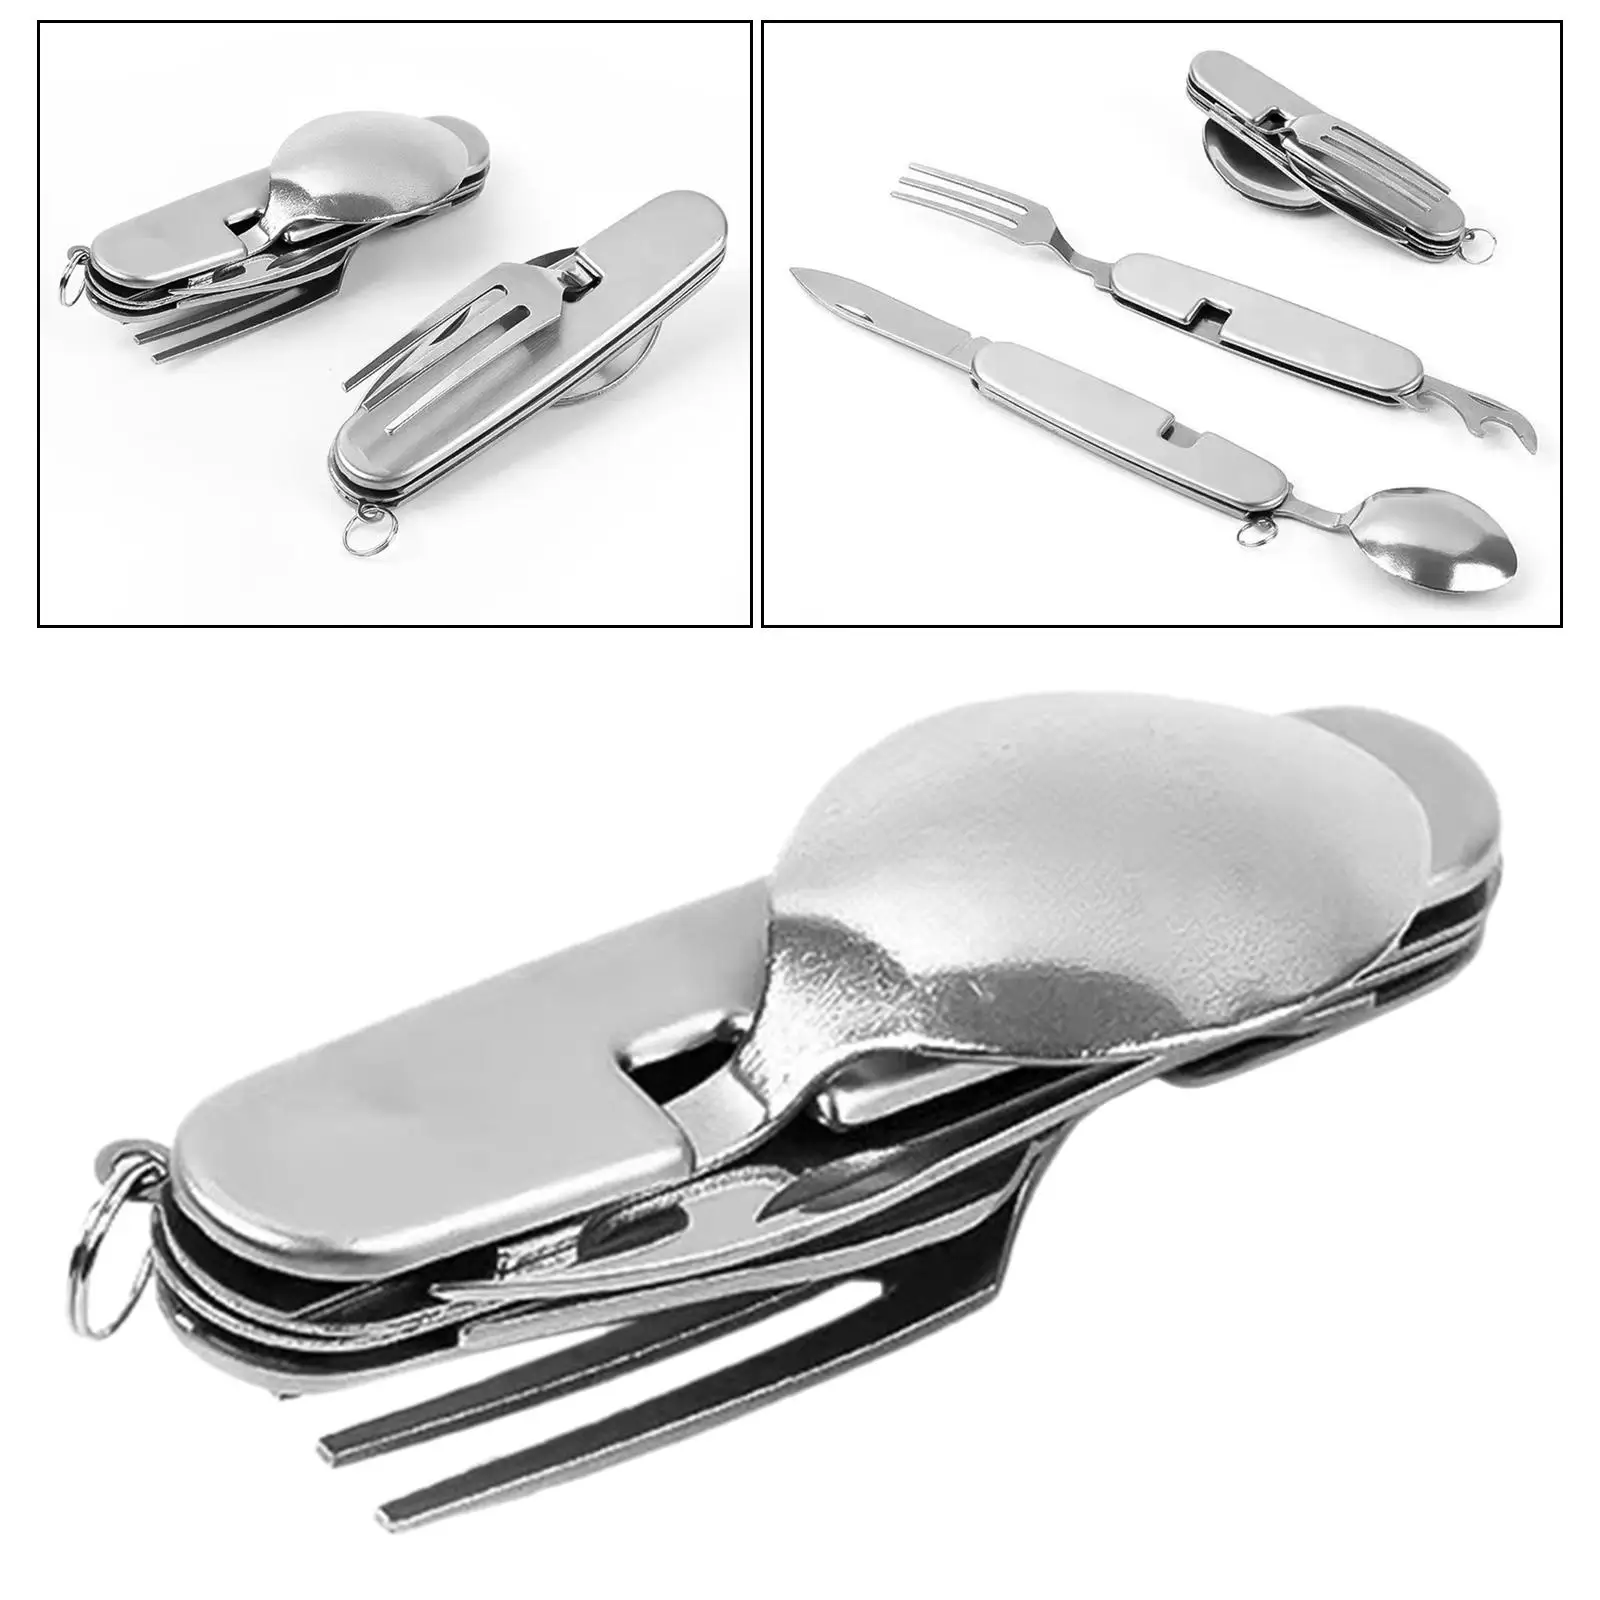 5 in 1 Camping Utensils Camping Cutlery Foldable Flatware Knife, Spoon, Fork, Bottle Opener, Can Opener Set for BBQ, Home